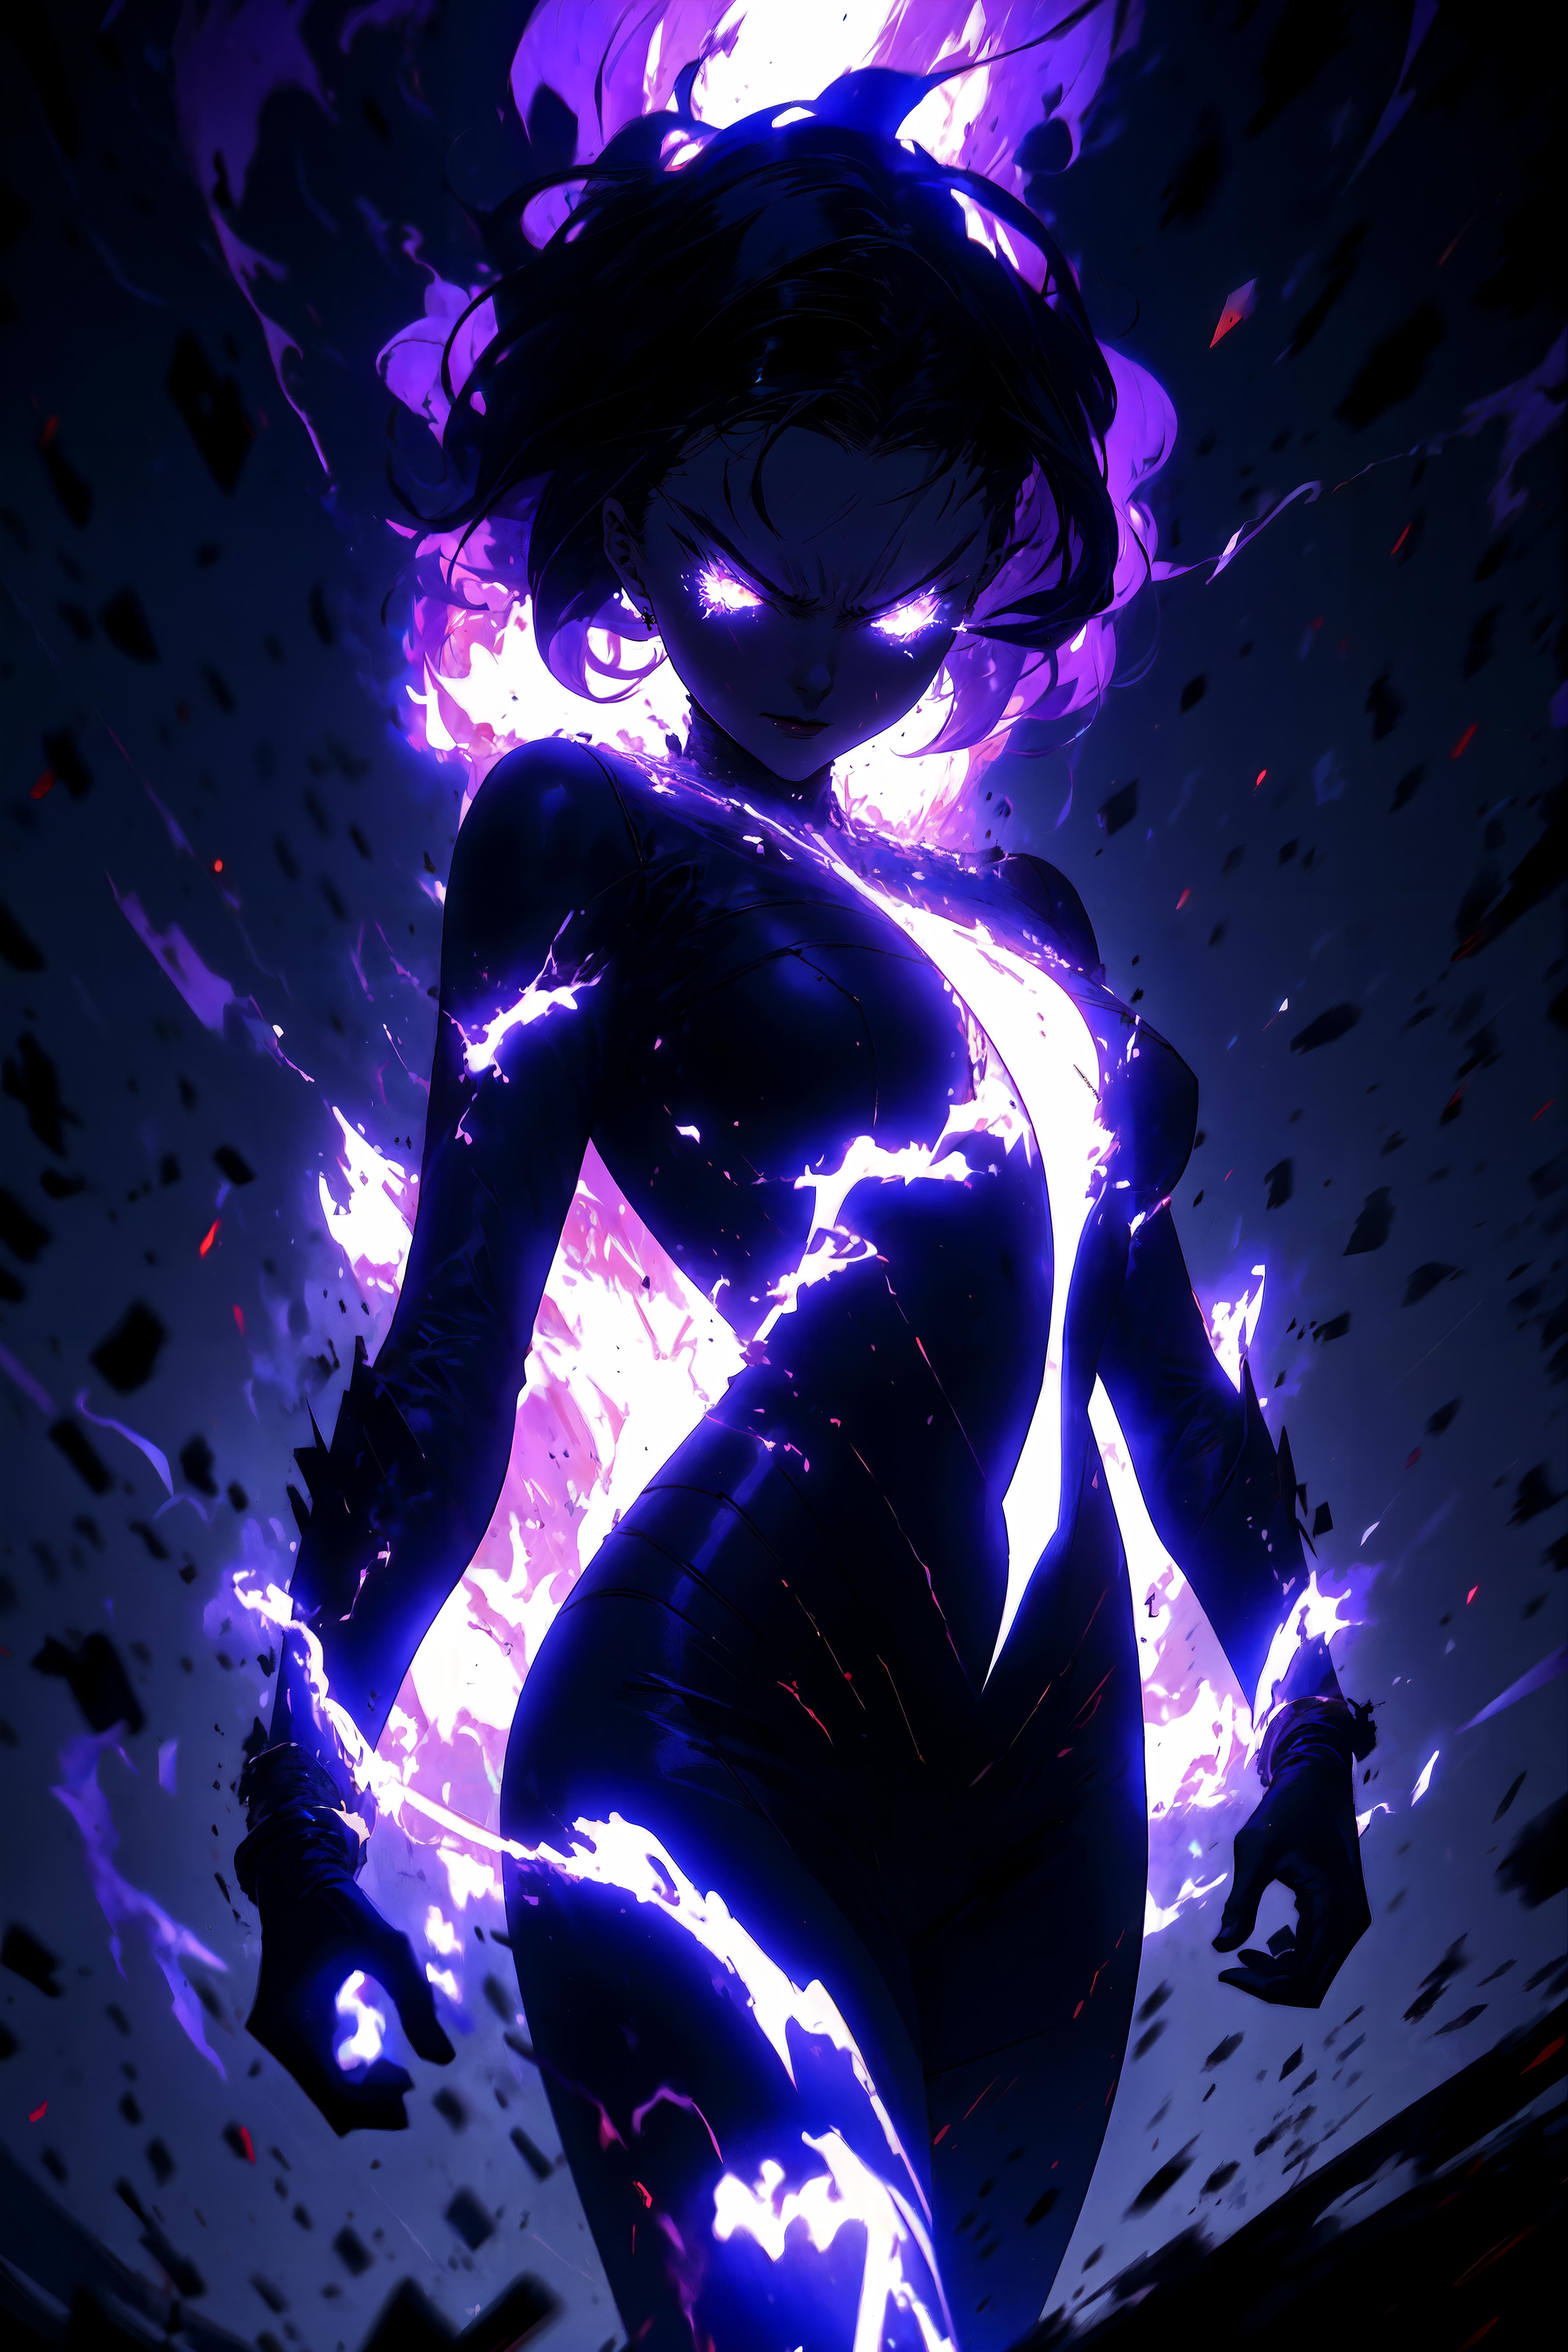 A woman with purple hair and a black dress, surrounded by blue and purple lightning.